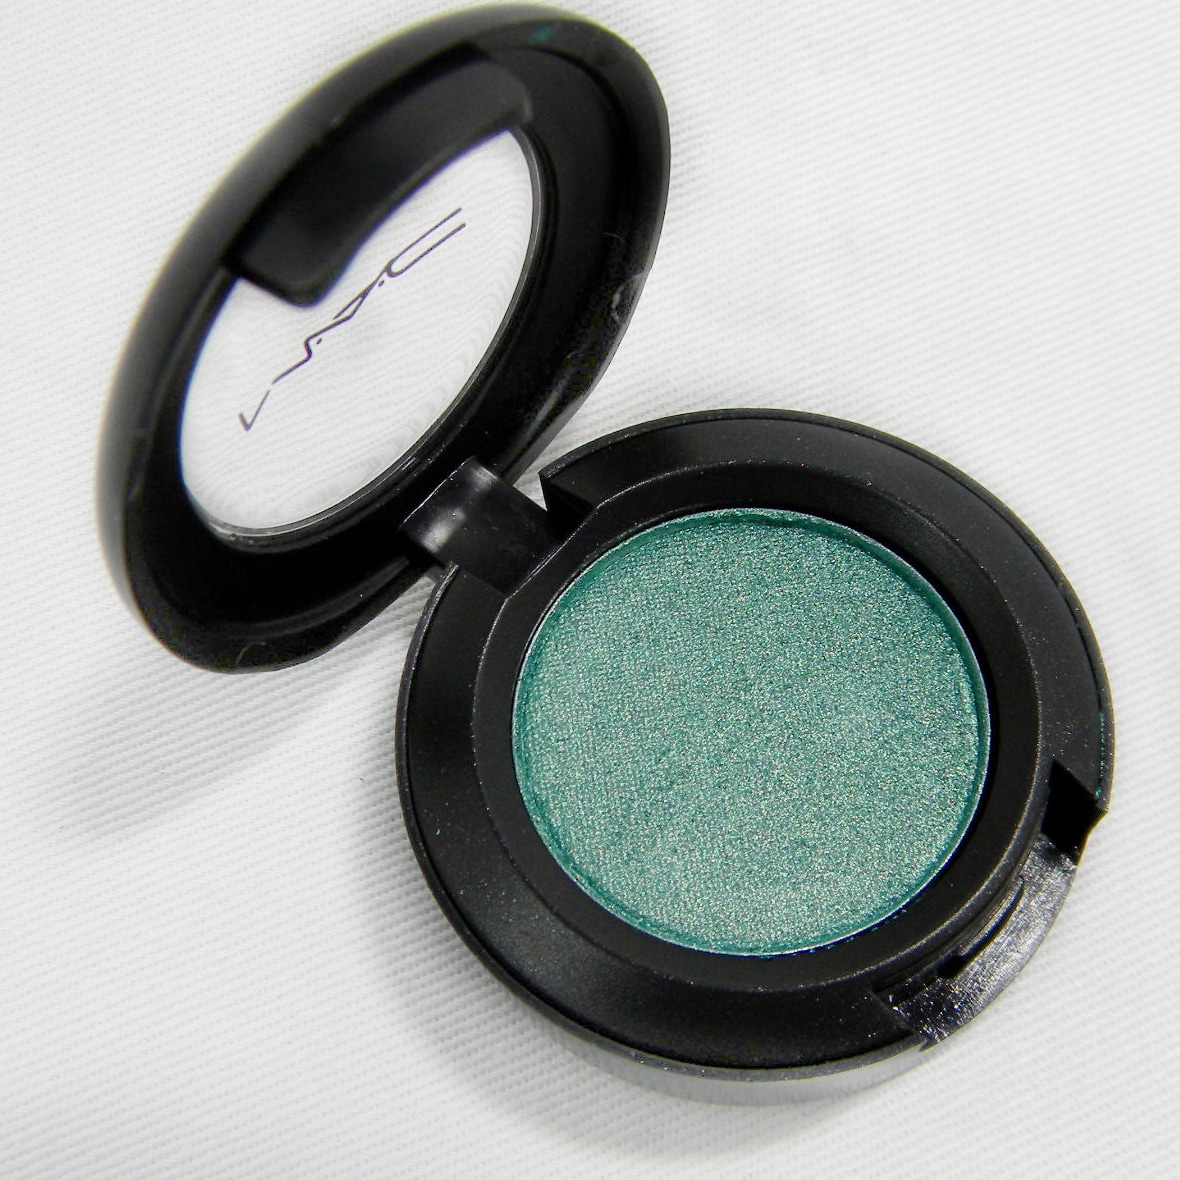 MAC Shimmermoss Eye Shadow (Unboxed) Today $10.99